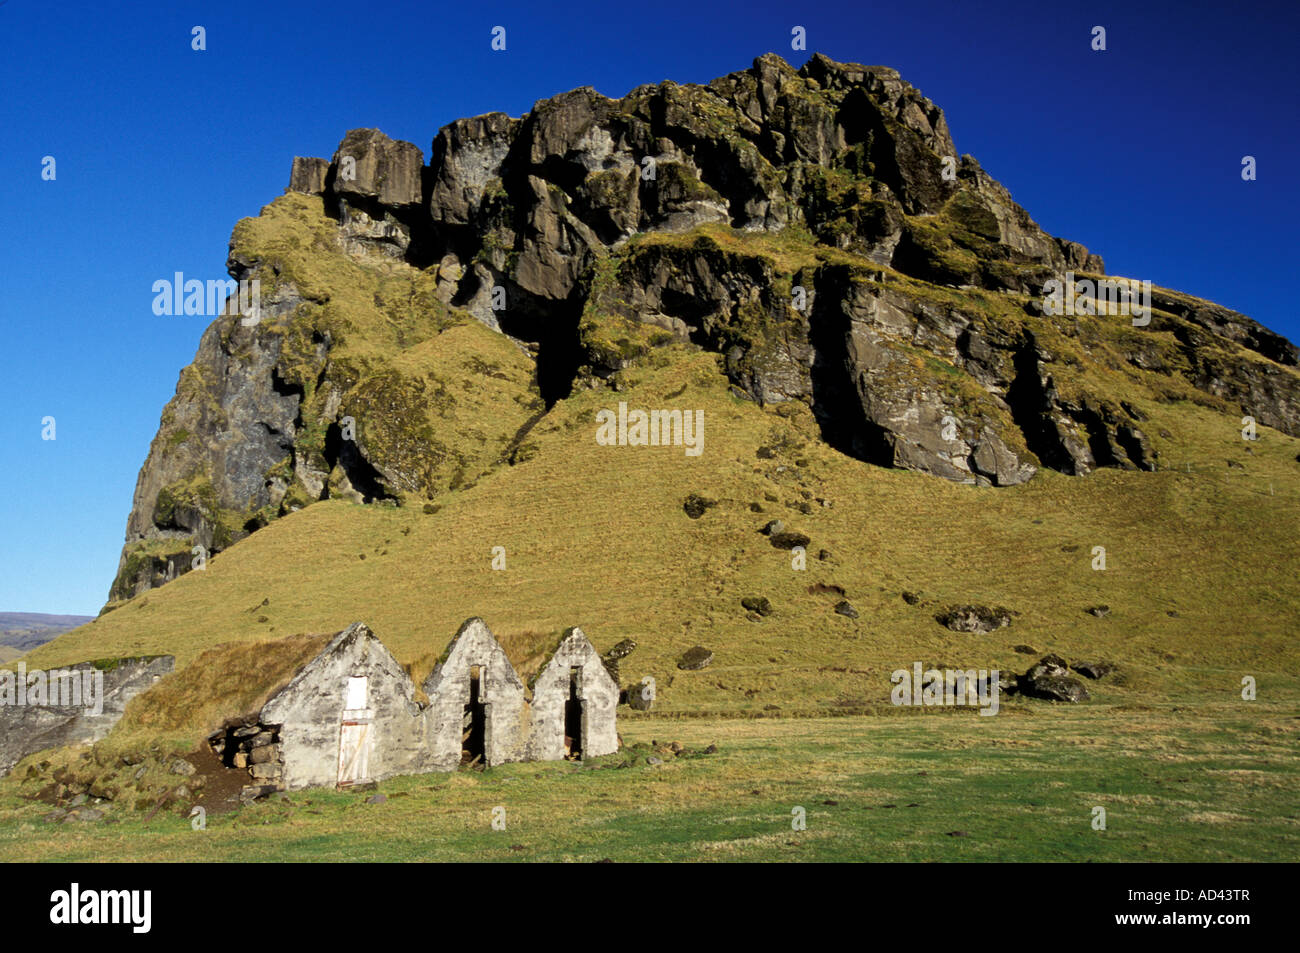 Southwest Iceland Old abandoned houses sit at the foot of a rock formation  Stock Photo